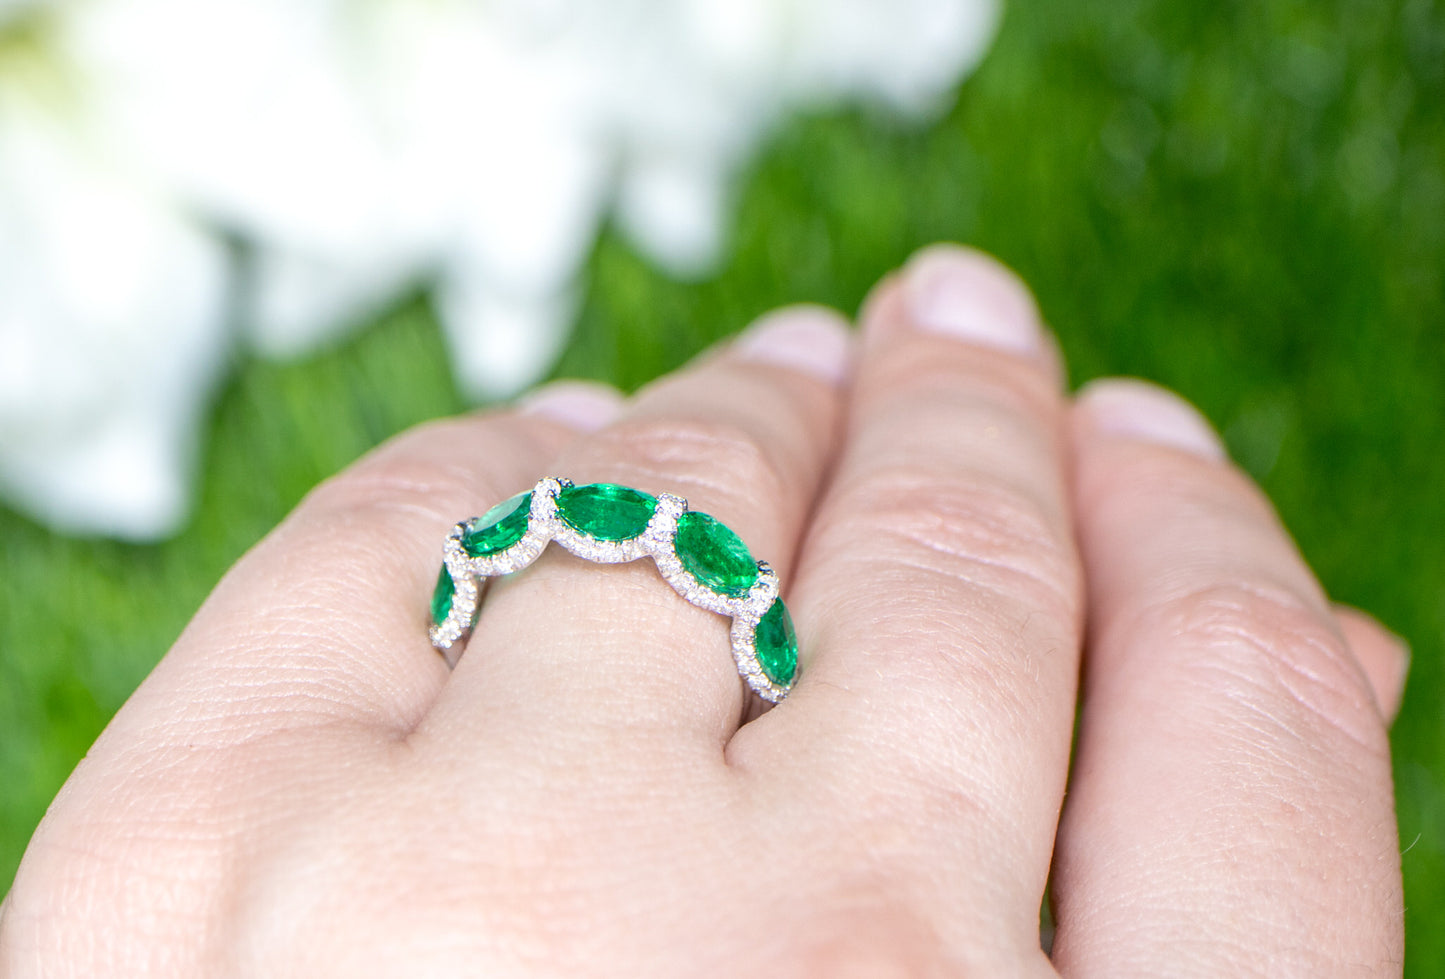 Emerald Band Ring With Diamonds 2.45 Carats 18K Gold